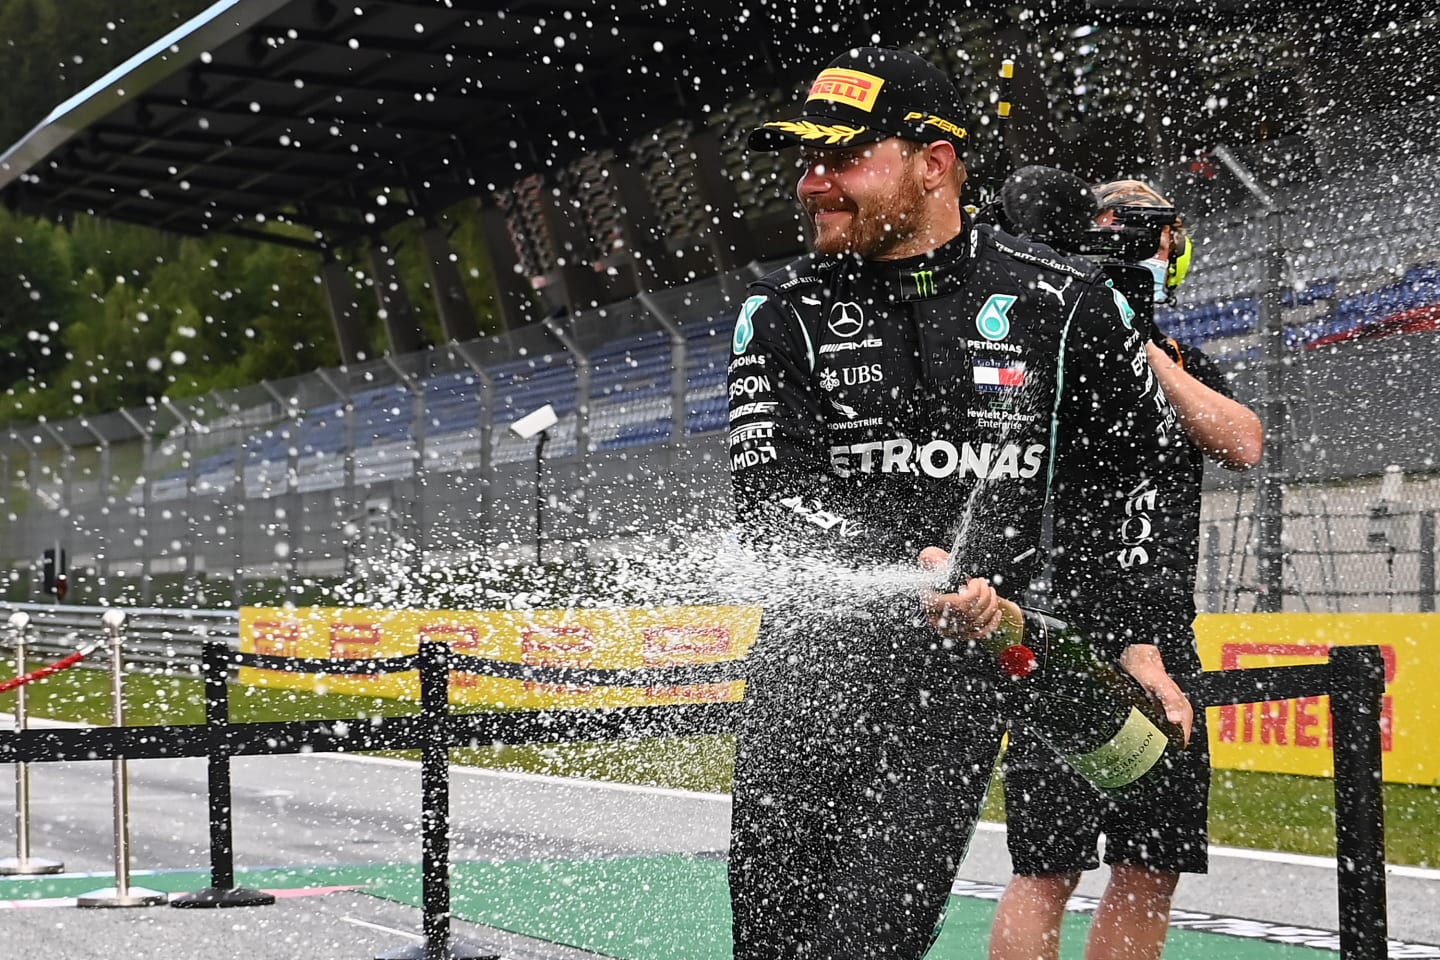 SPIELBERG, AUSTRIA - JULY 12: Second placed Valtteri Bottas of Finland and Mercedes GP celebrates on the podium after the Formula One Grand Prix of Styria at Red Bull Ring on July 12, 2020 in Spielberg, Austria. (Photo by Joe Klamar/Pool via Getty Images)